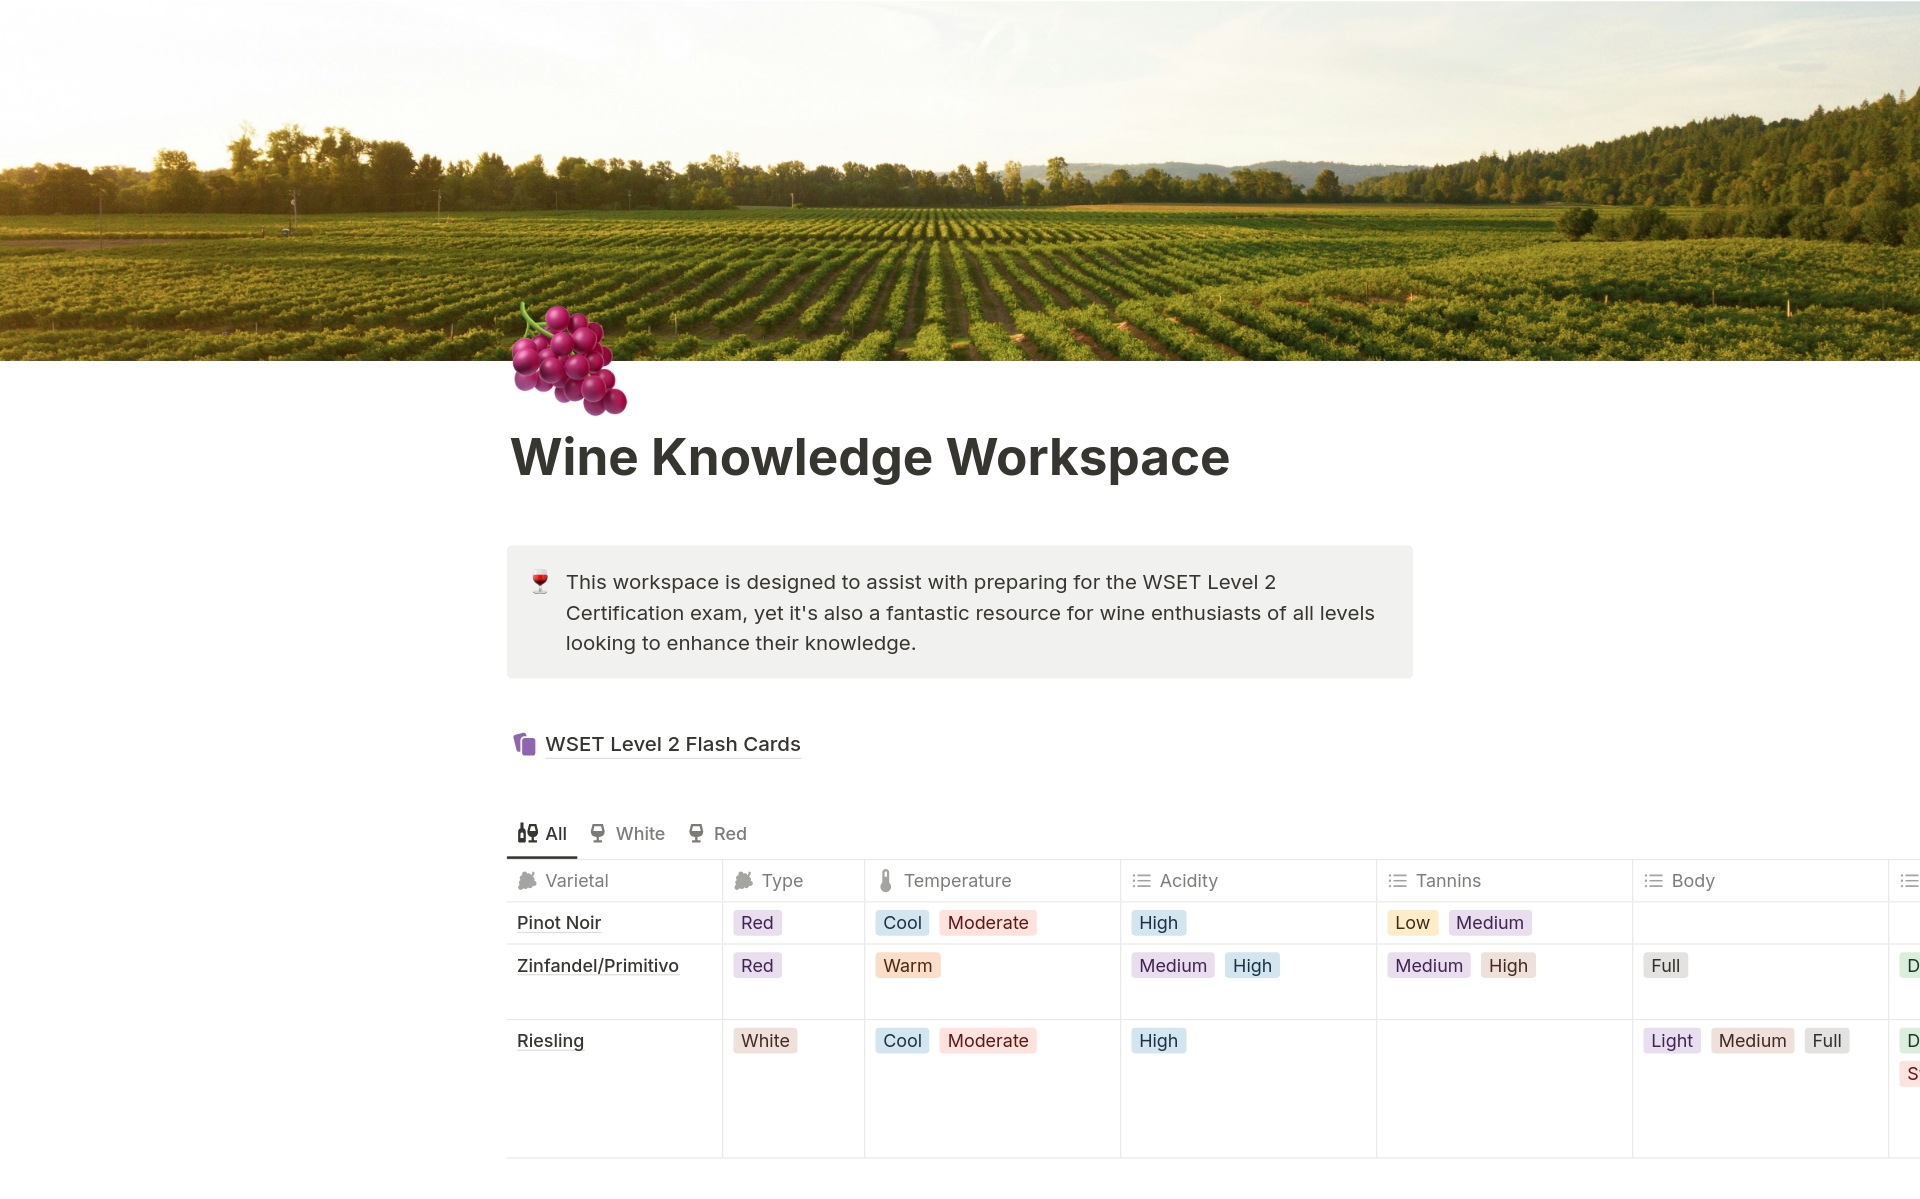 This template is perfect for wine certification candidates and enthusiasts, offering resources to explore wine varietals by acidity, tannins, and notes. It also includes and interactive quiz with the ability to prioritize questions based on level of difficulty - enjoy! 